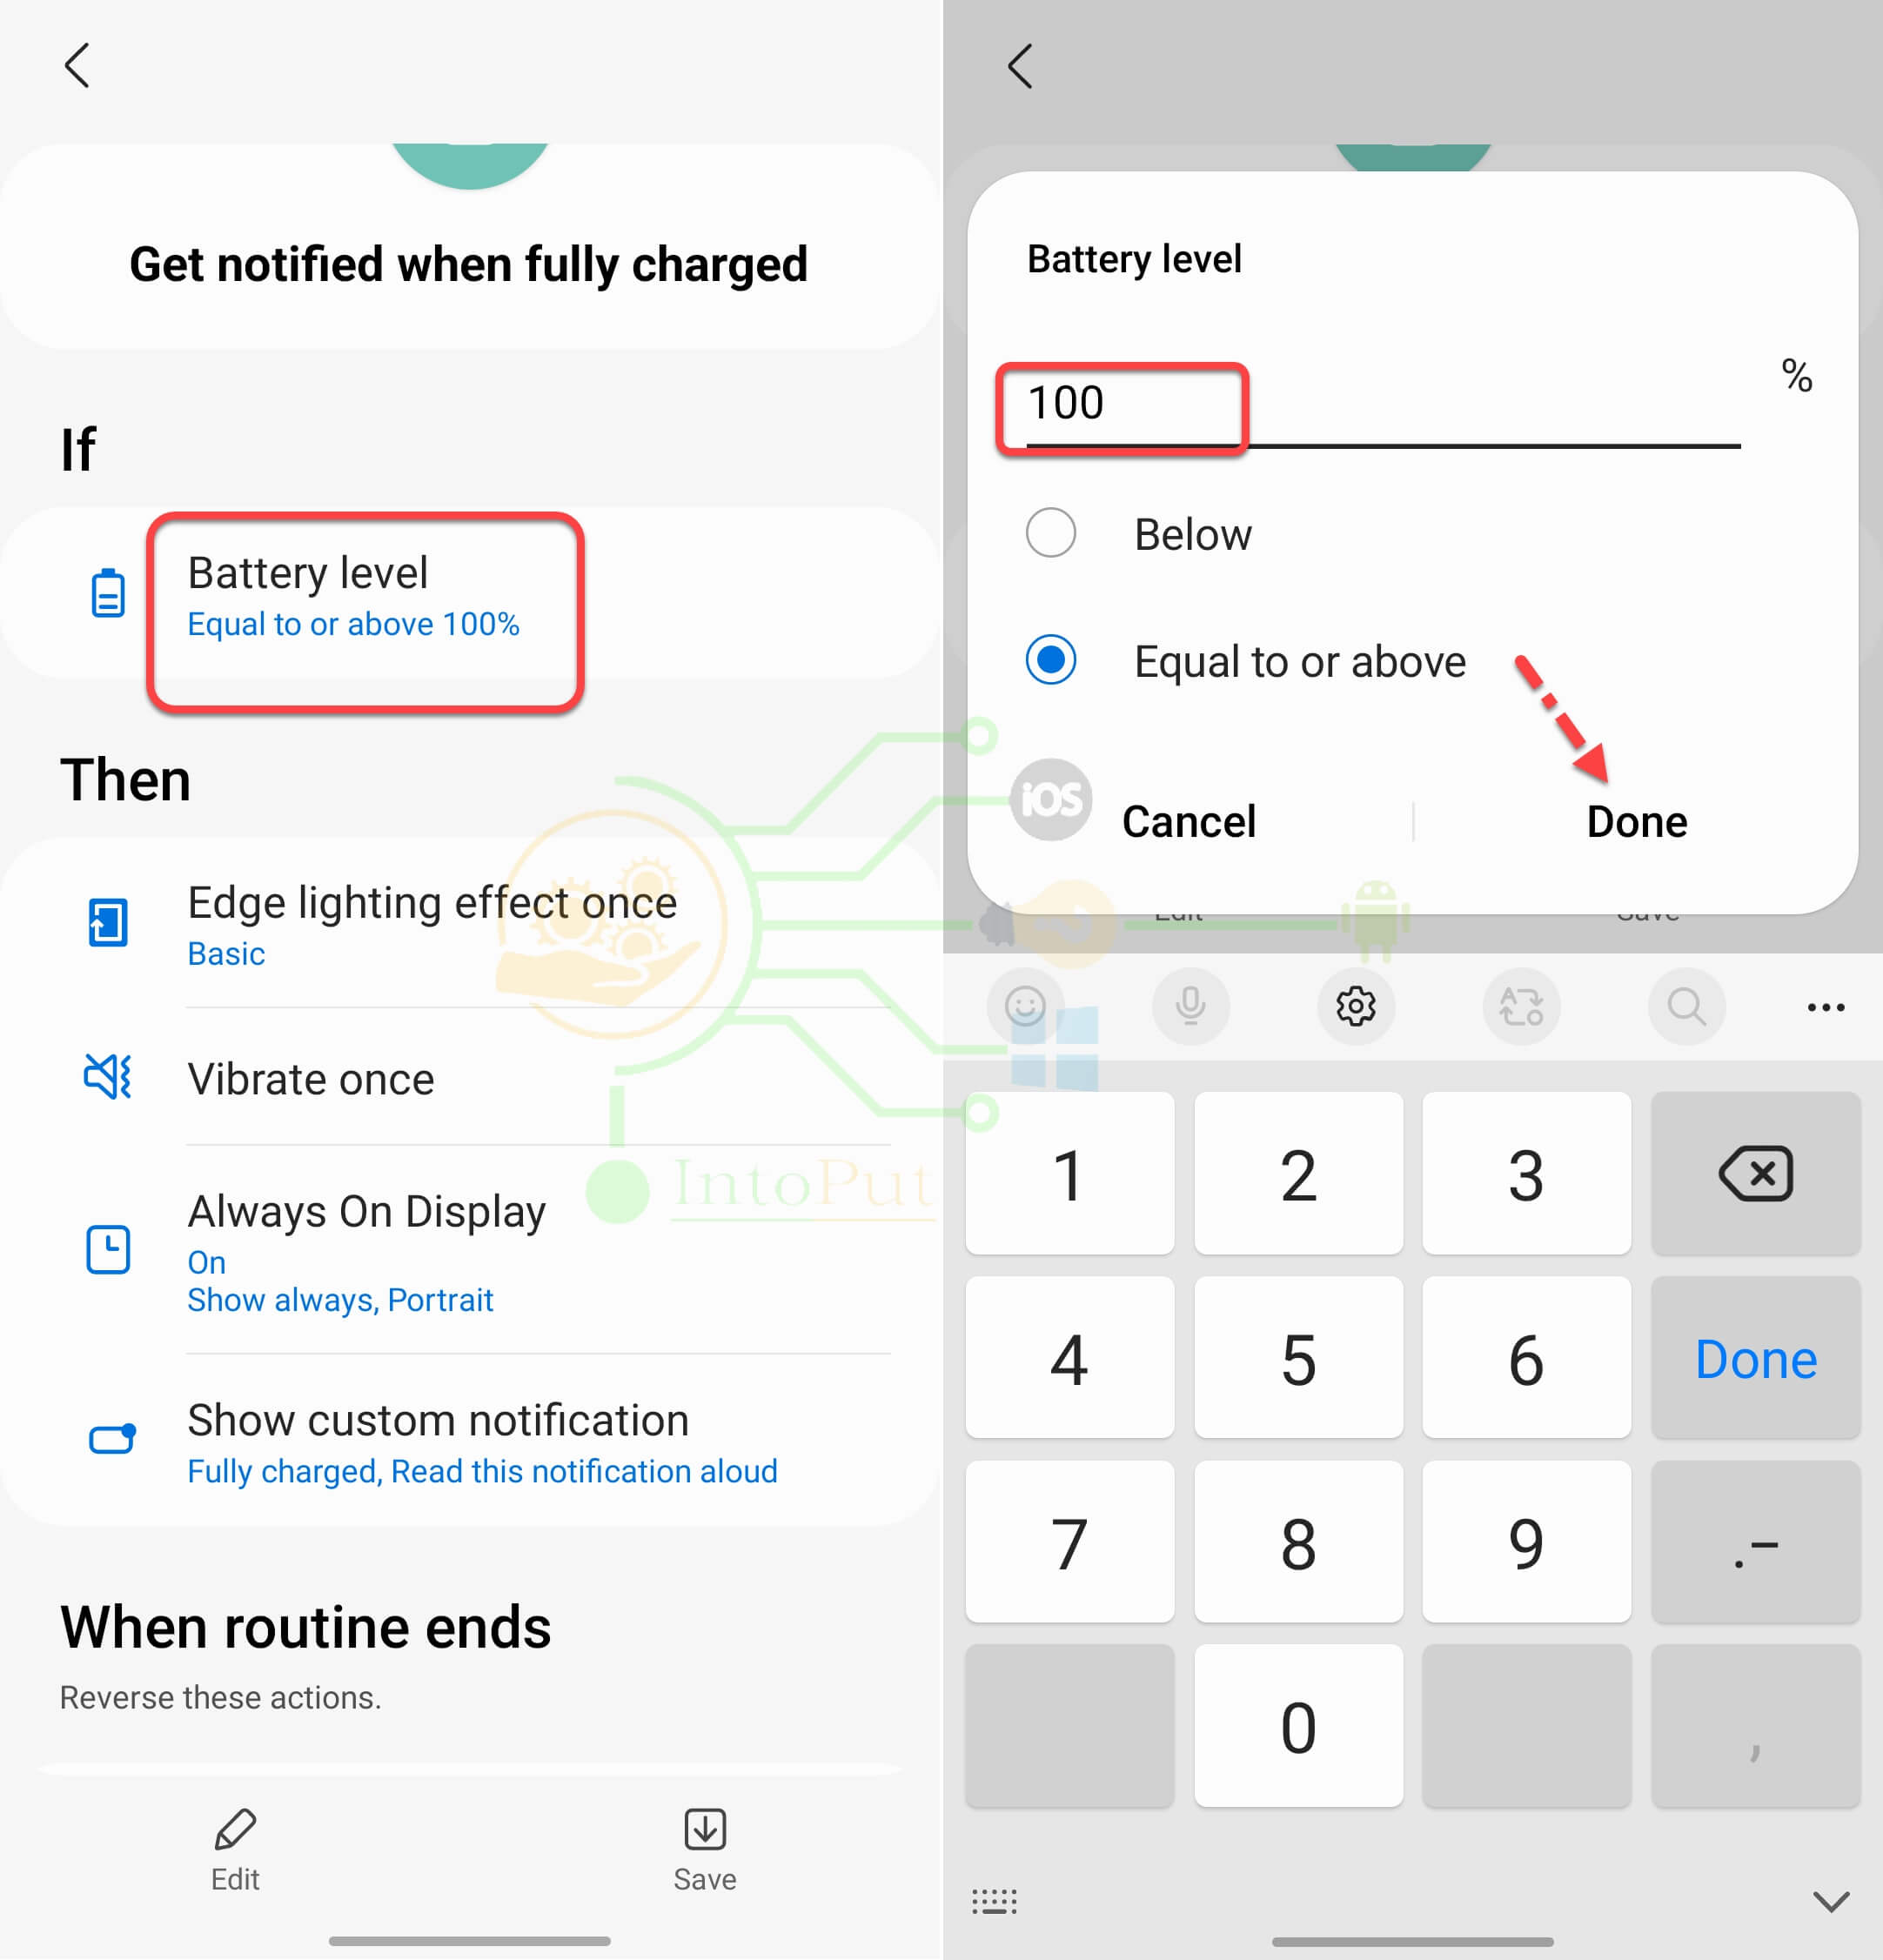 How to Get Battery Full Notification in Samsung Galaxy (Bixby Routines)